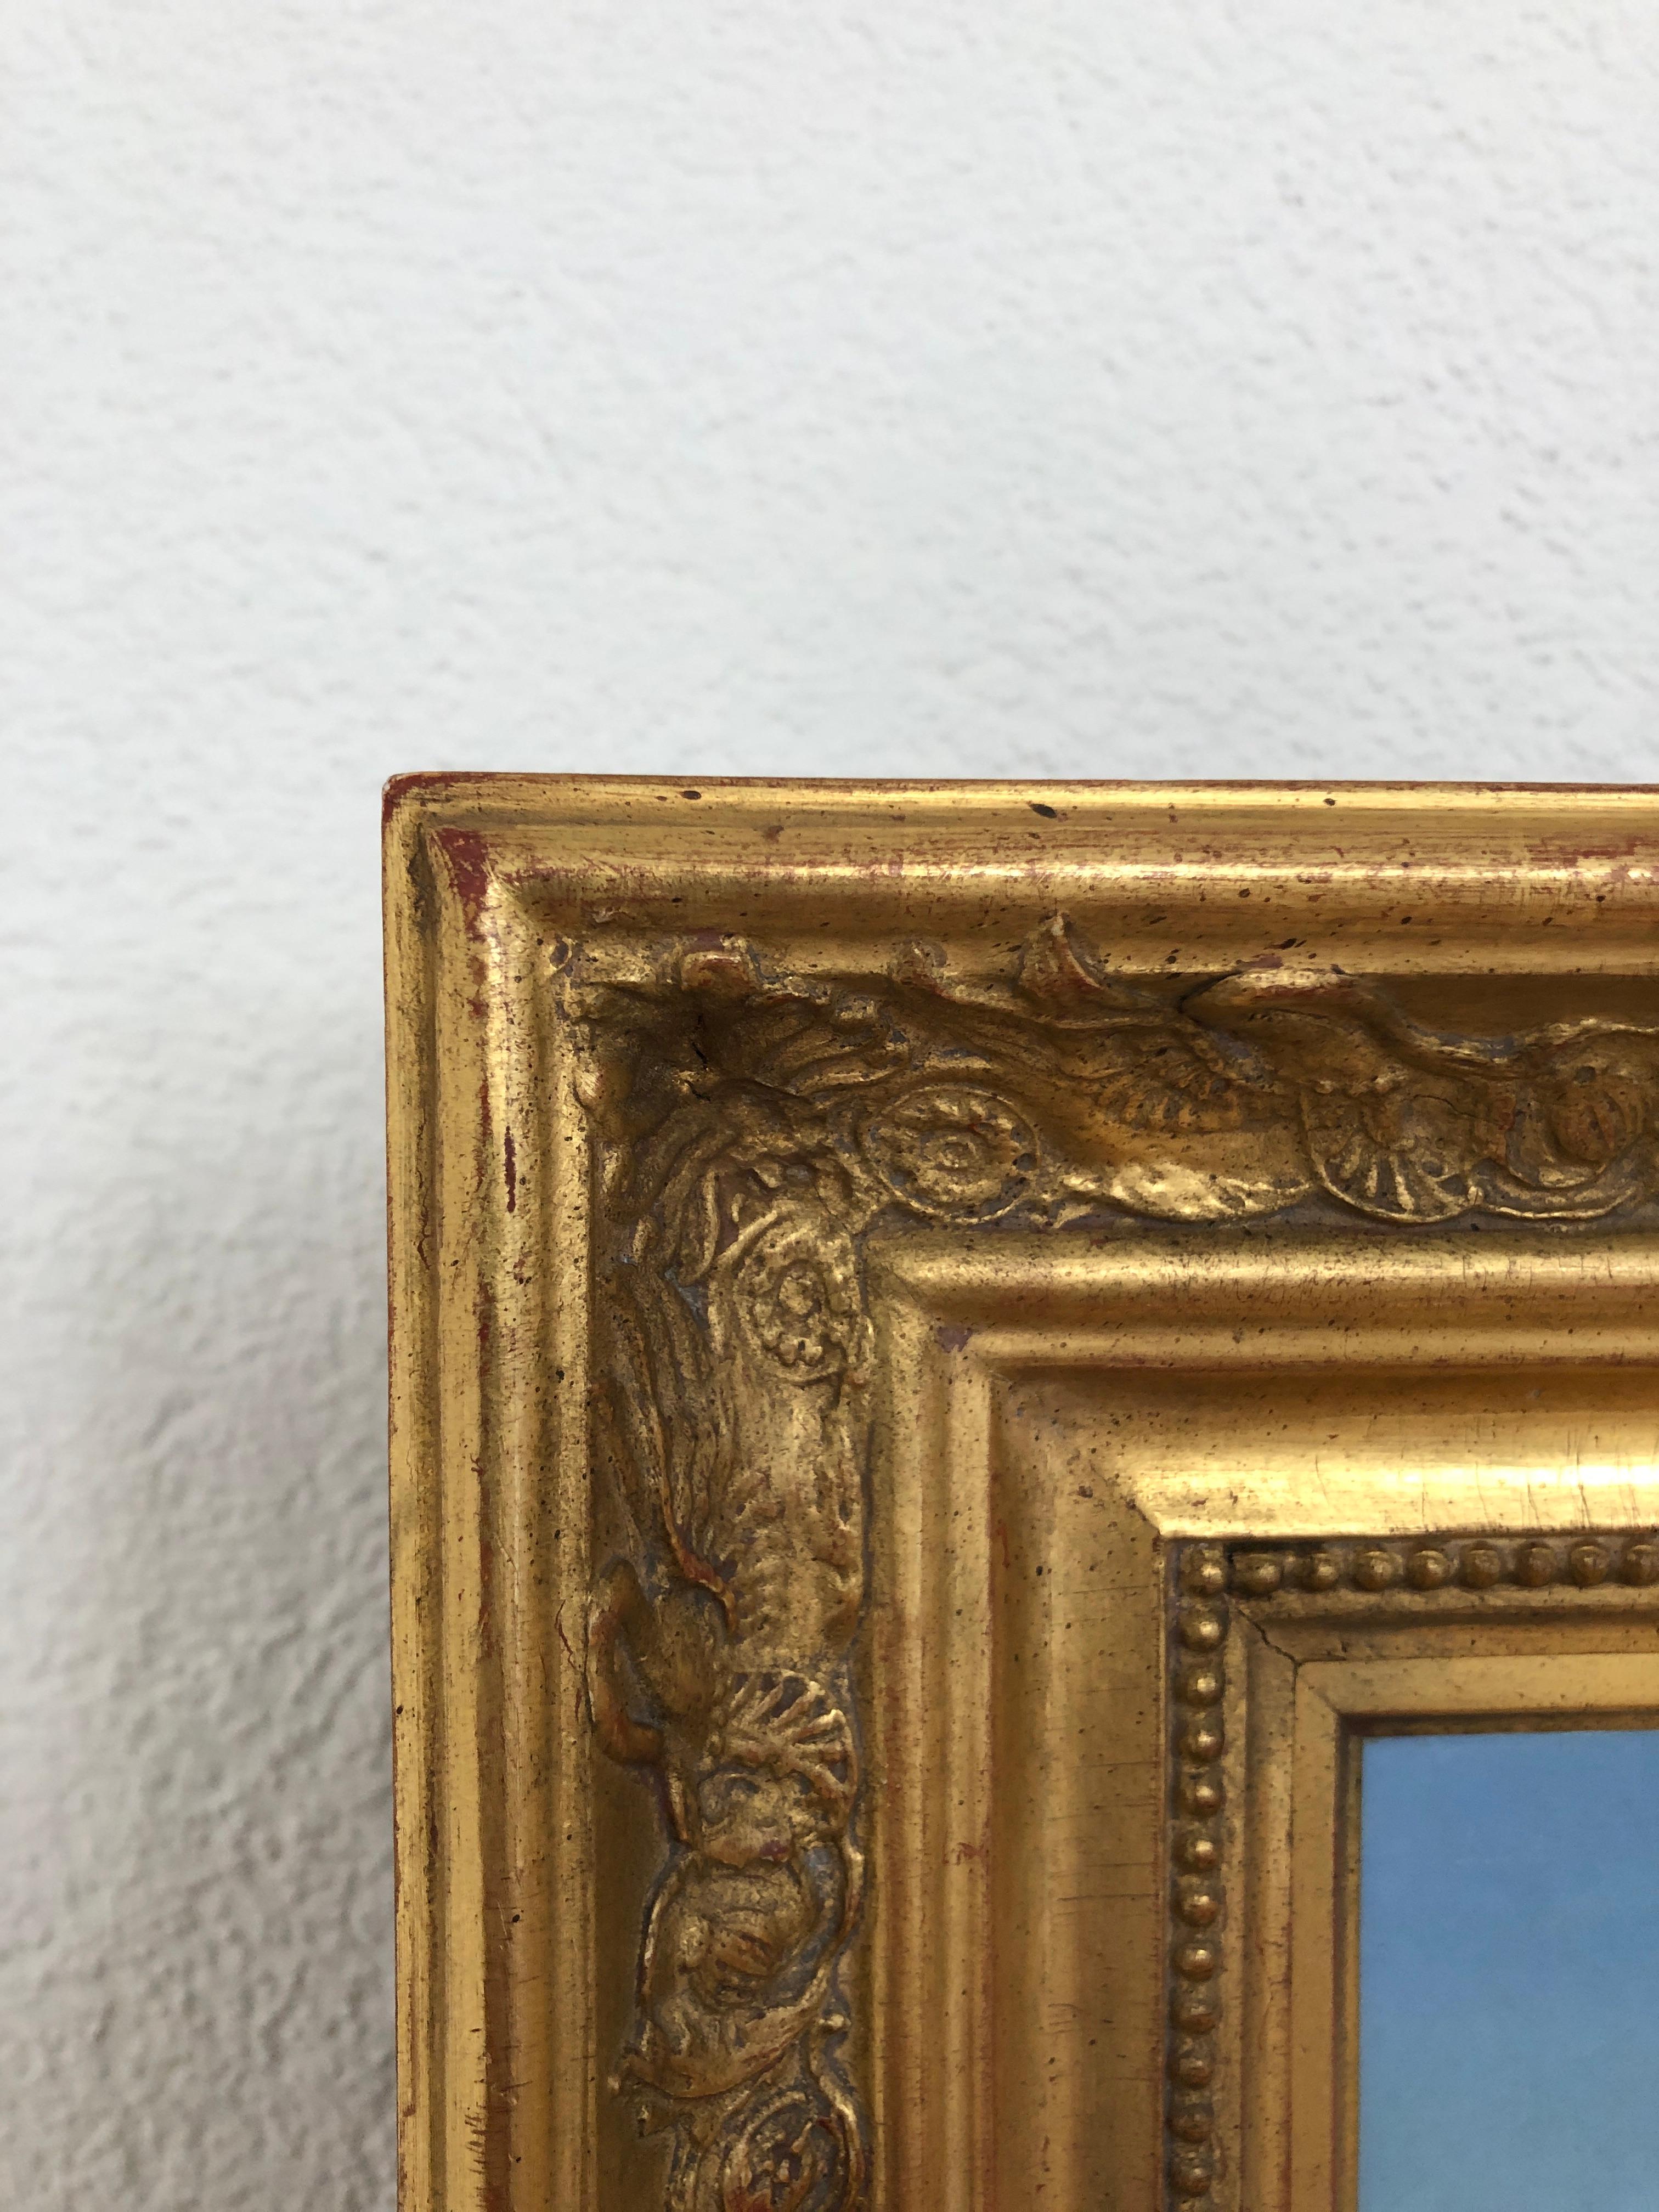 Artwork on canvas

Wooden frame and gilded plaster
58 x 69.5 x 7 cm
